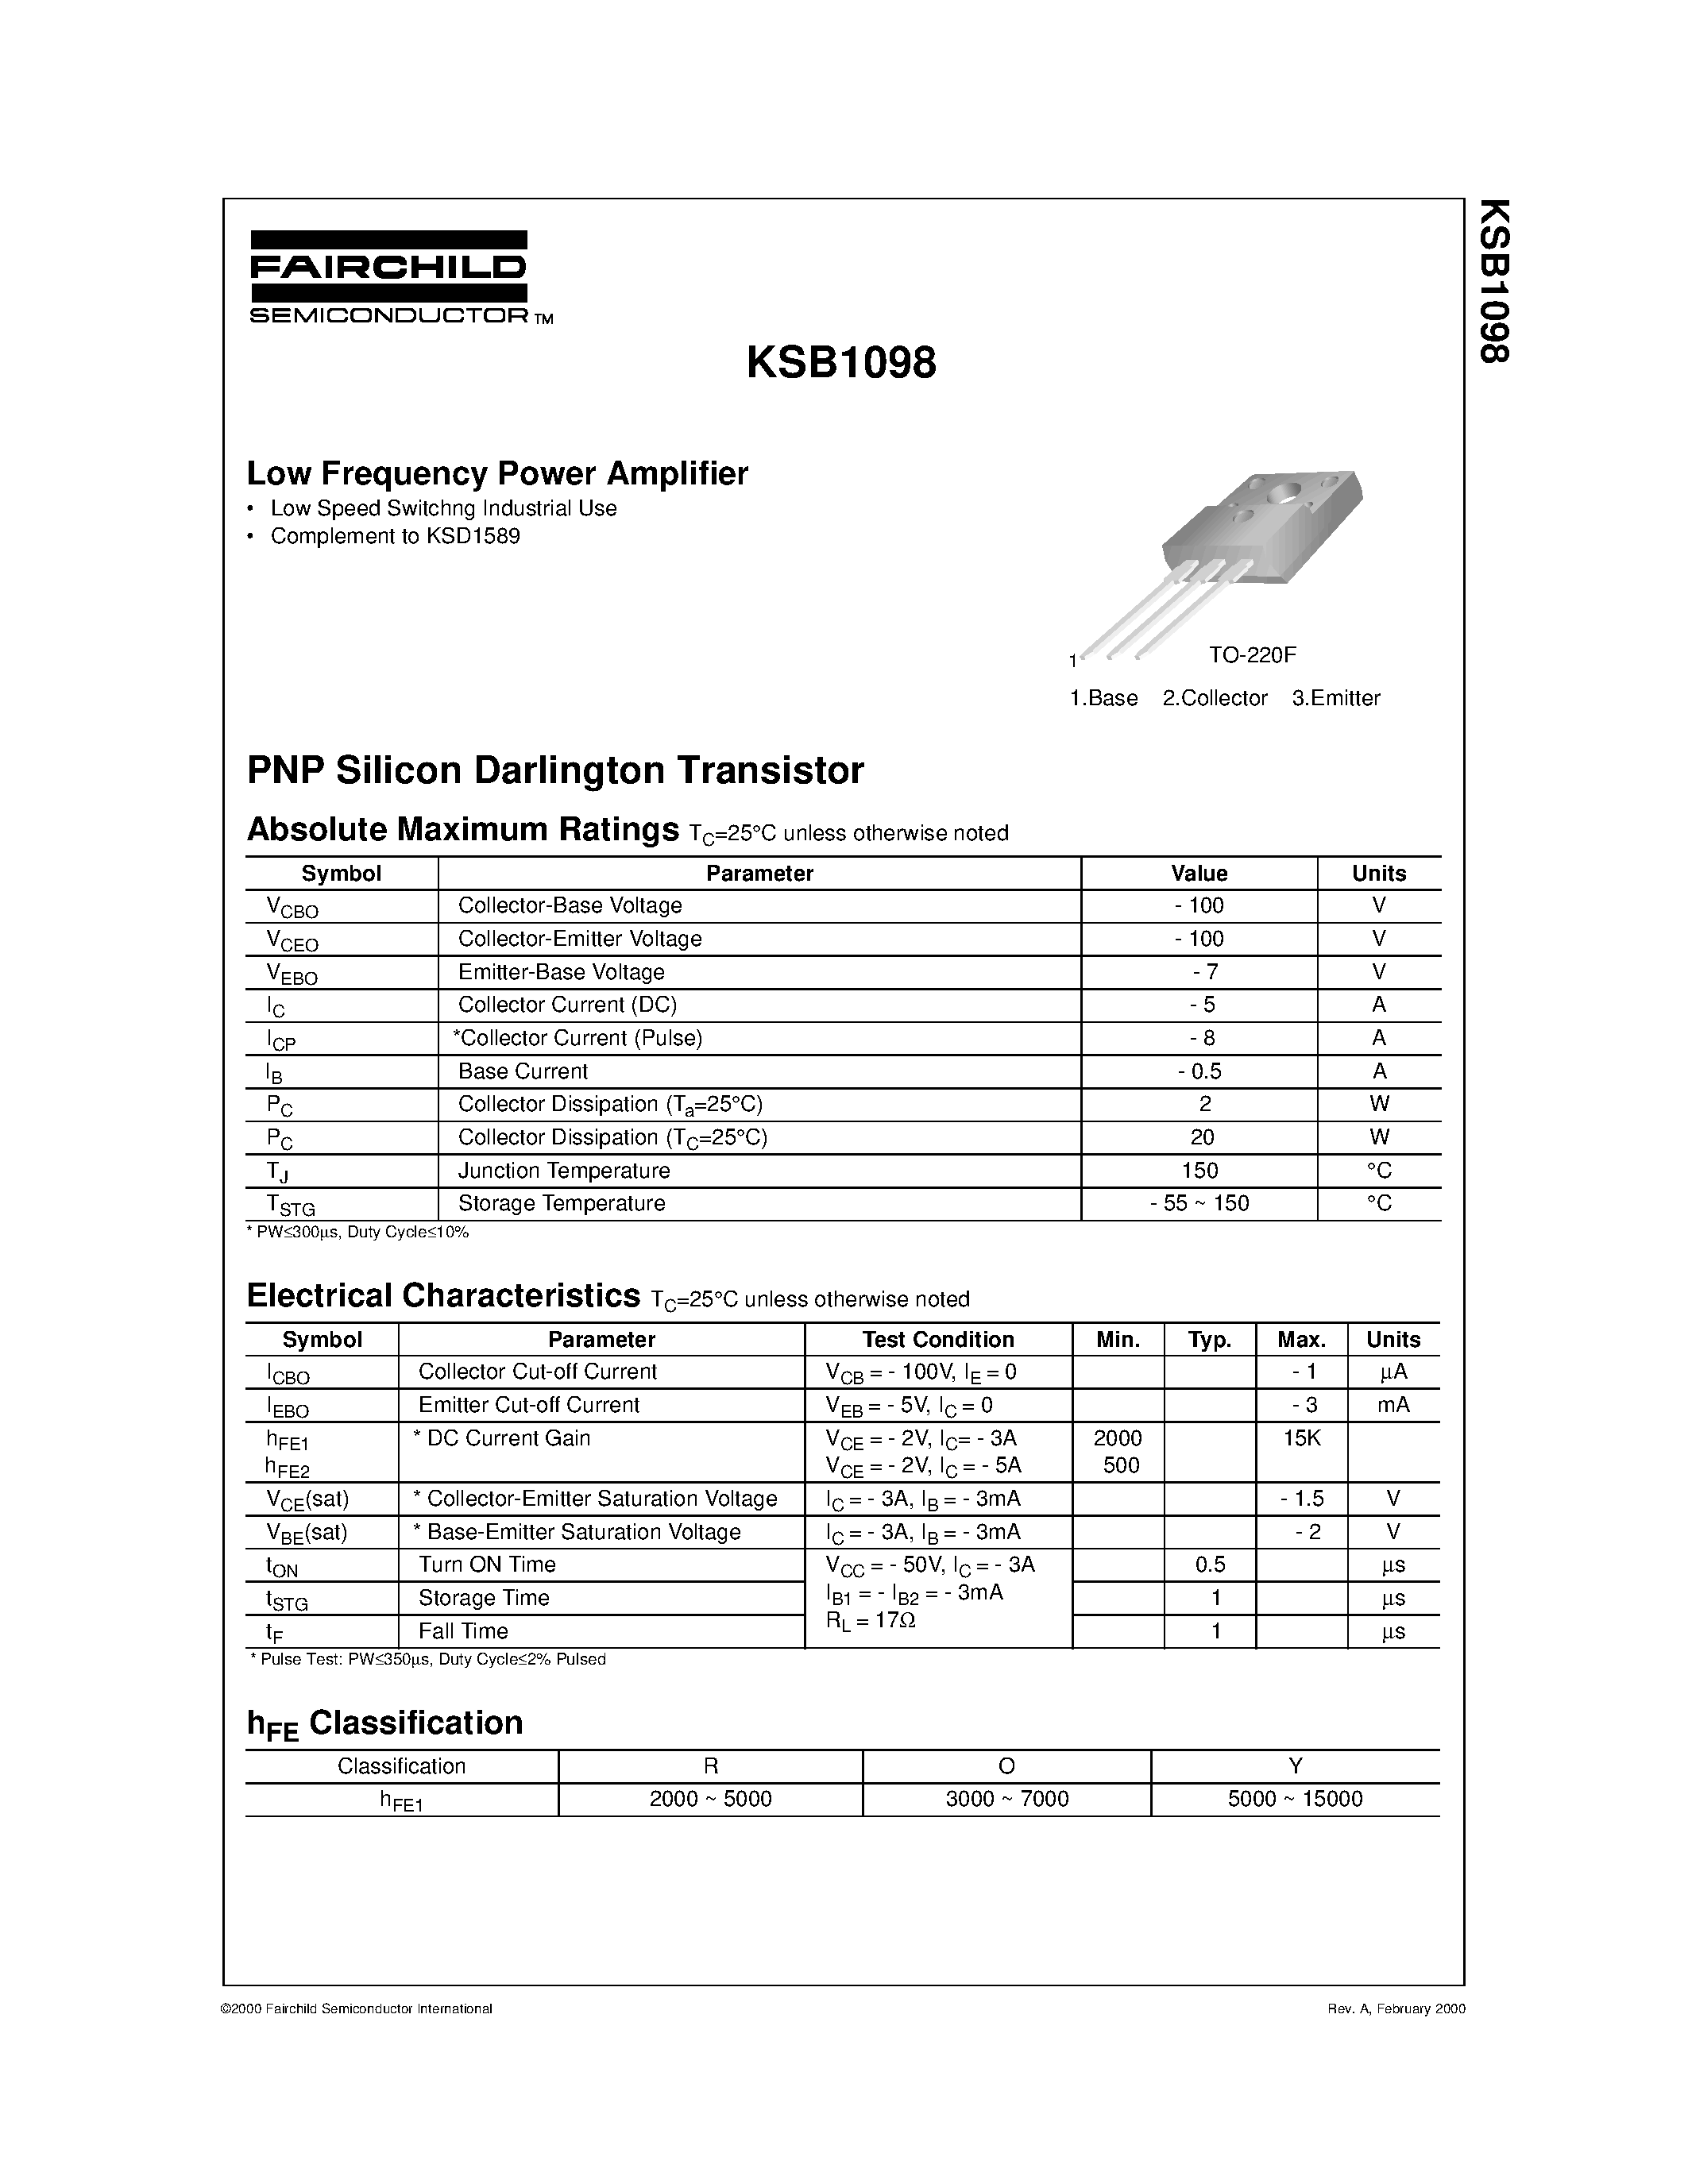 Даташит KSB1098-Low Frequency Power Amplifier страница 1